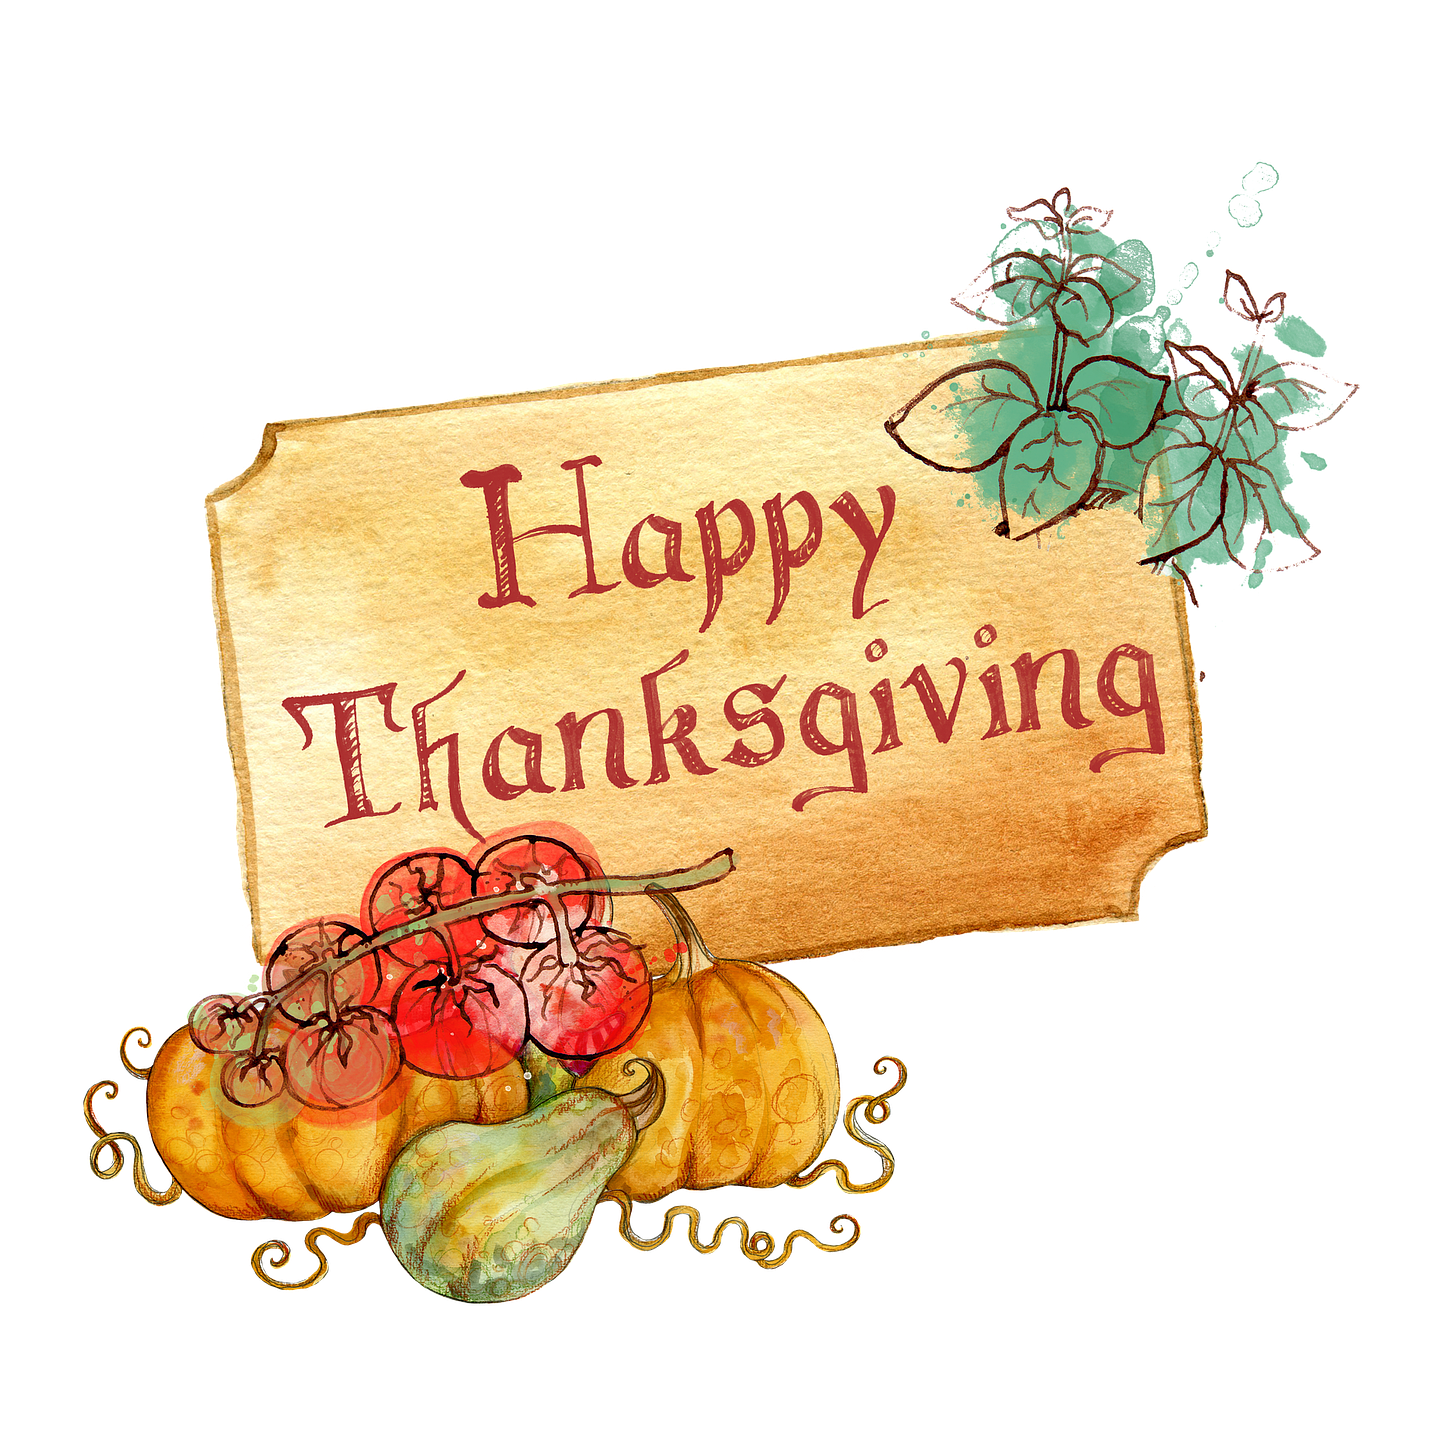 Happy Thanksgiving Image from Pixabay